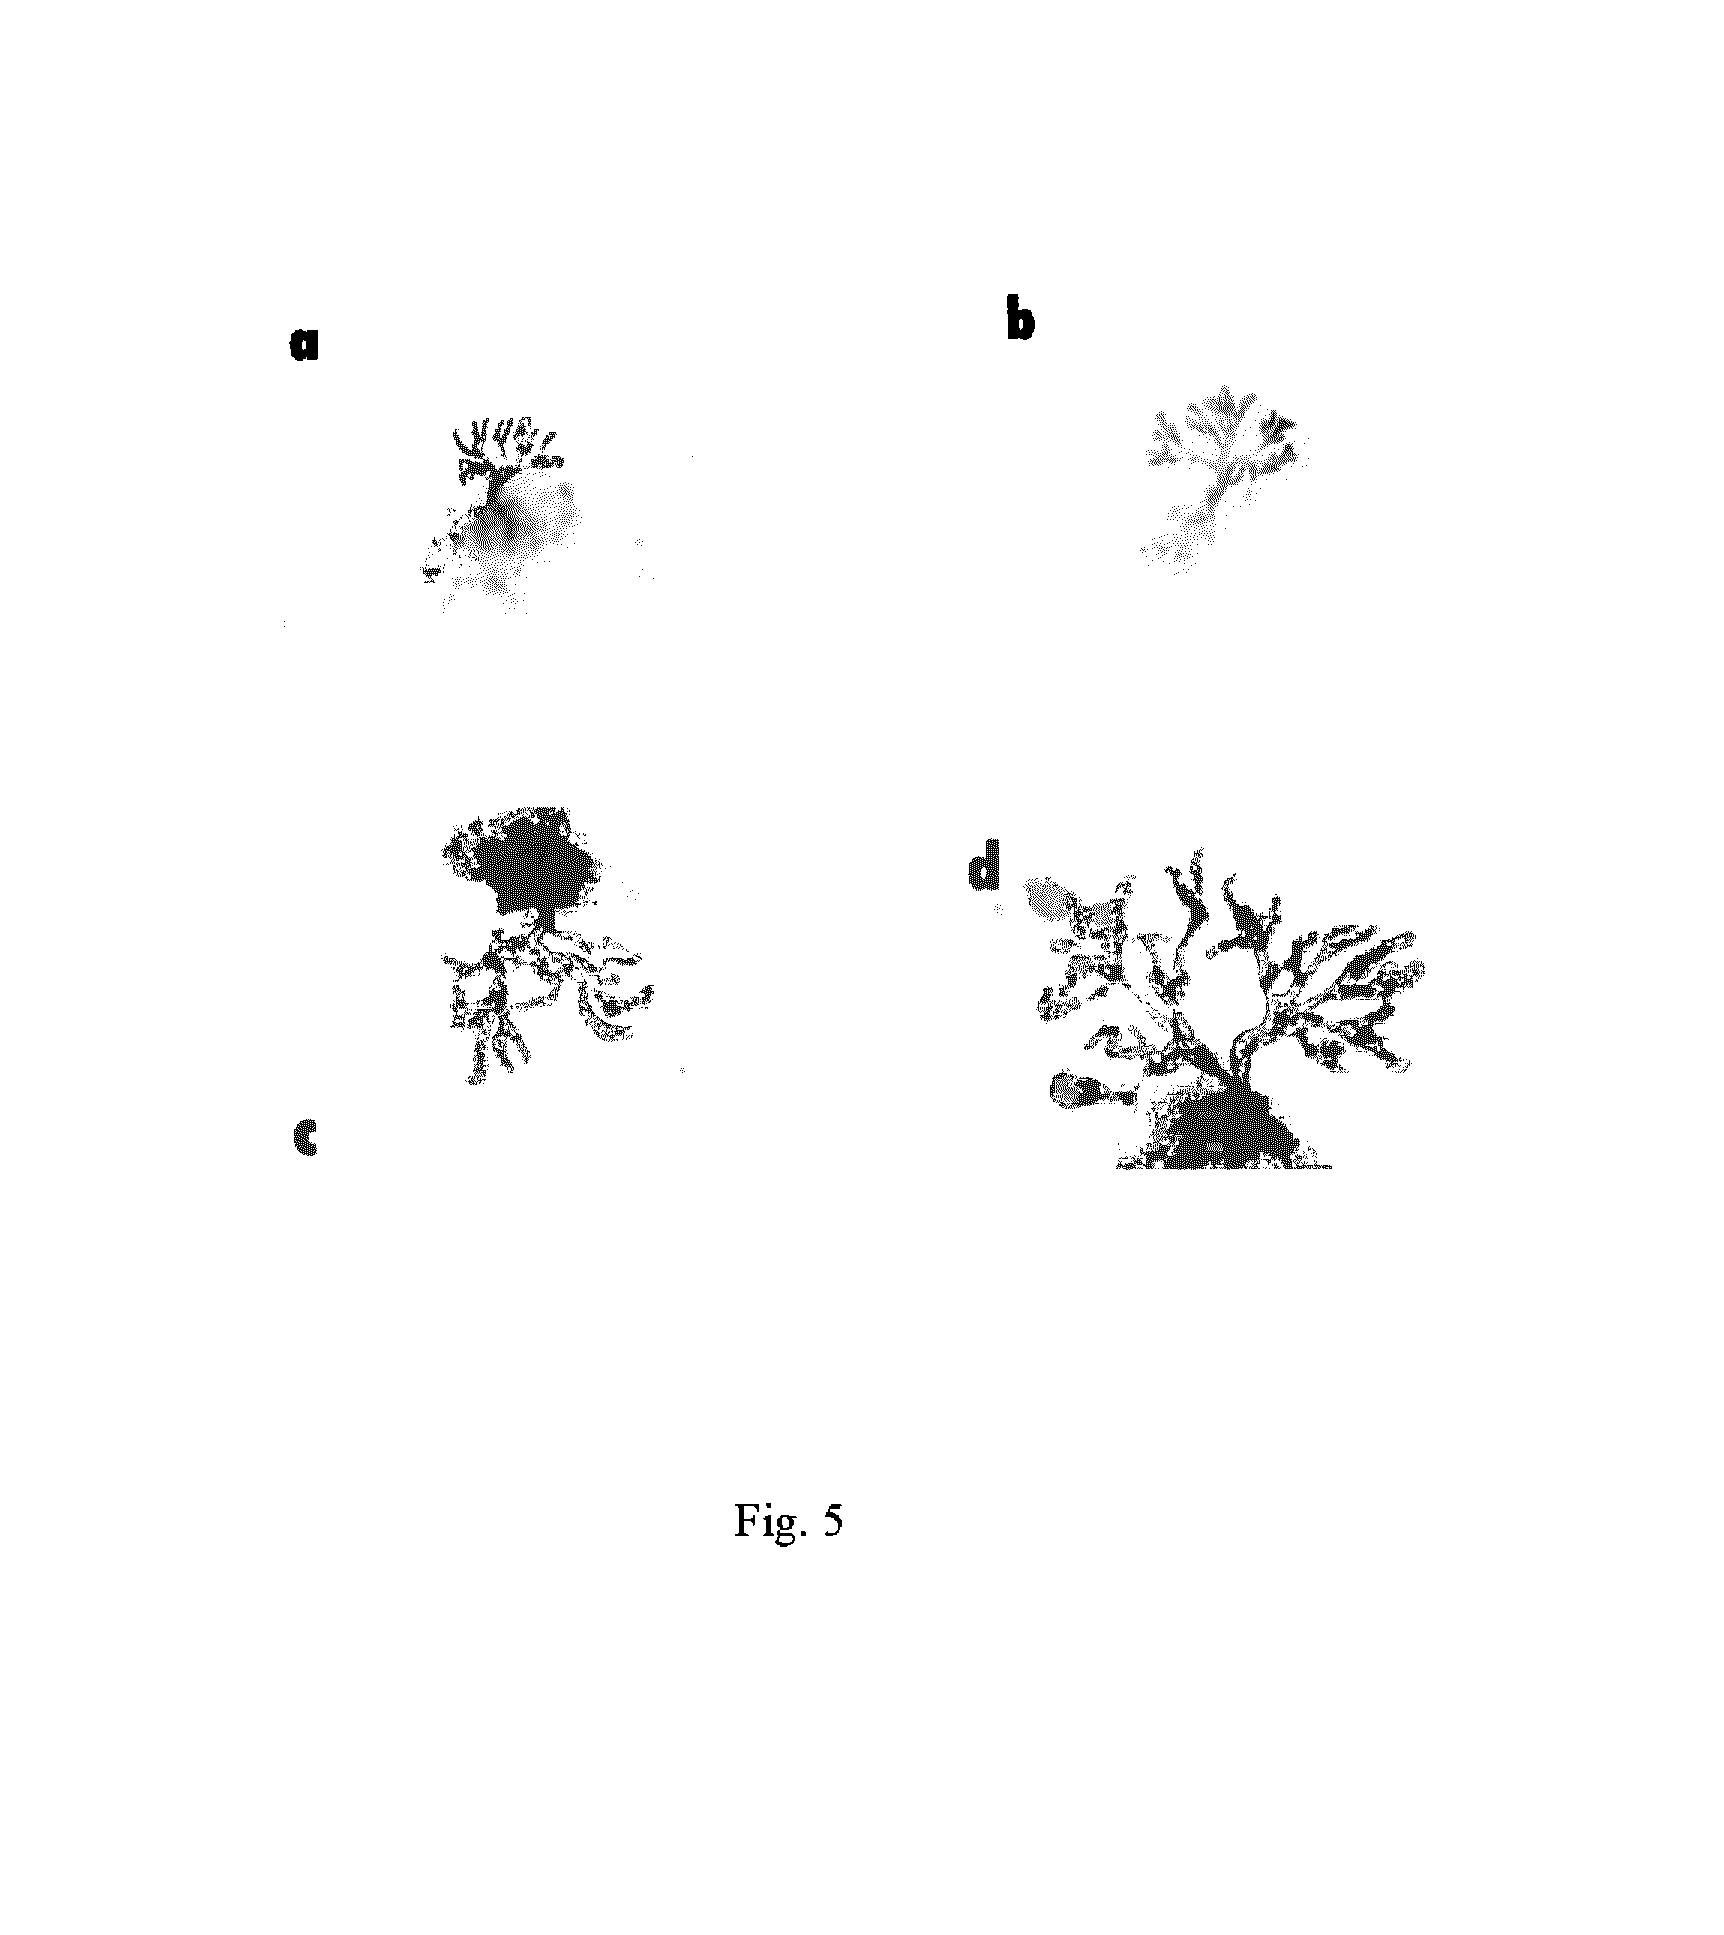 Methods for therapeutic treatment of benign prostatic hypertrophy (BPH)